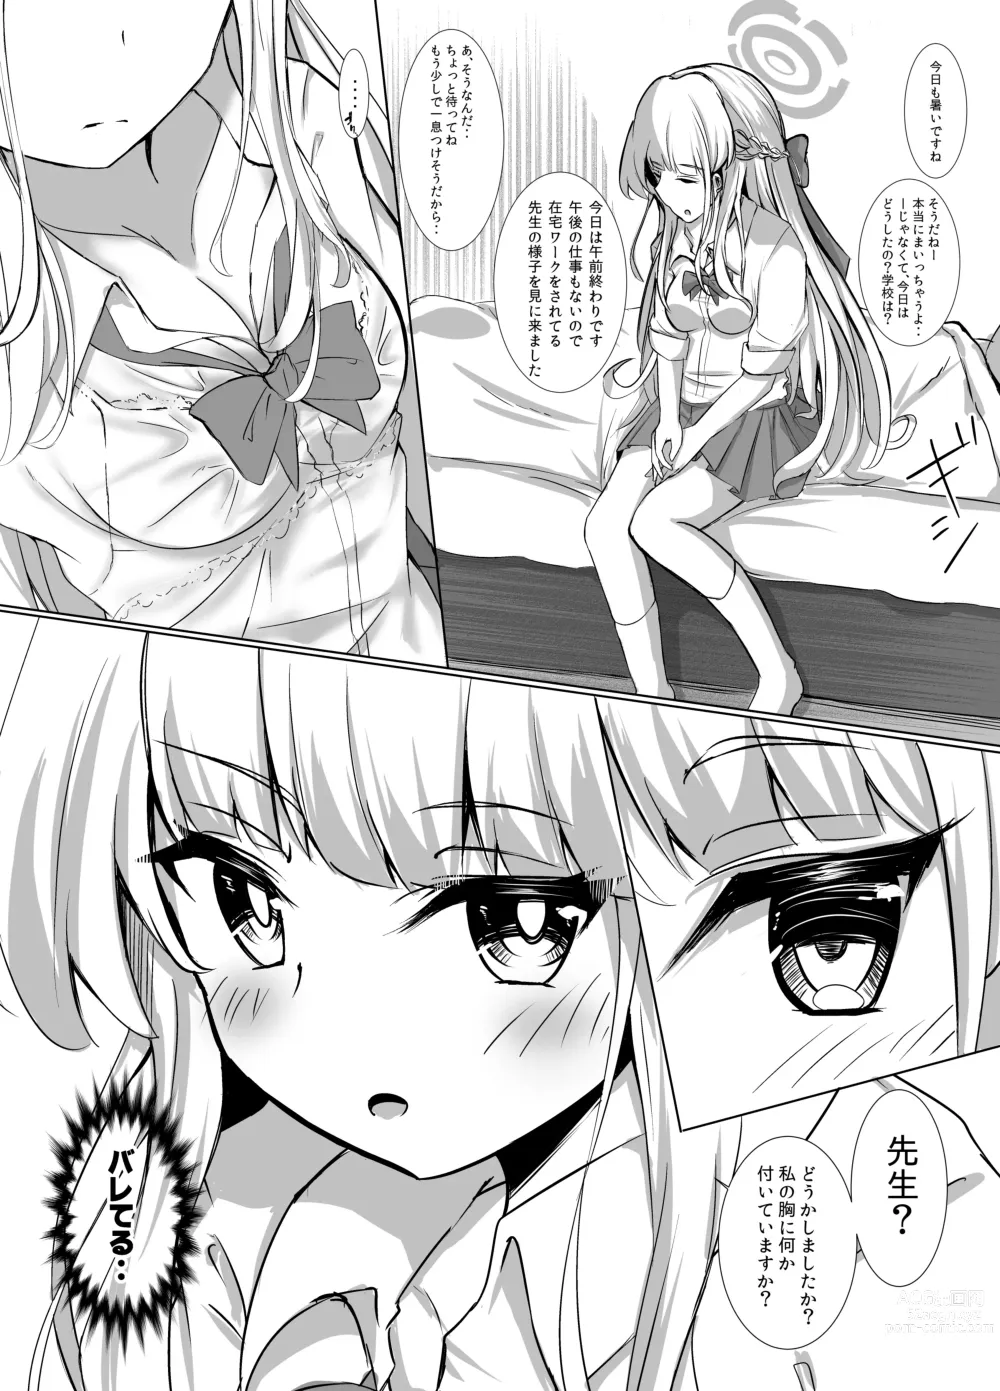 Page 3 of doujinshi Toki Early Afternoon